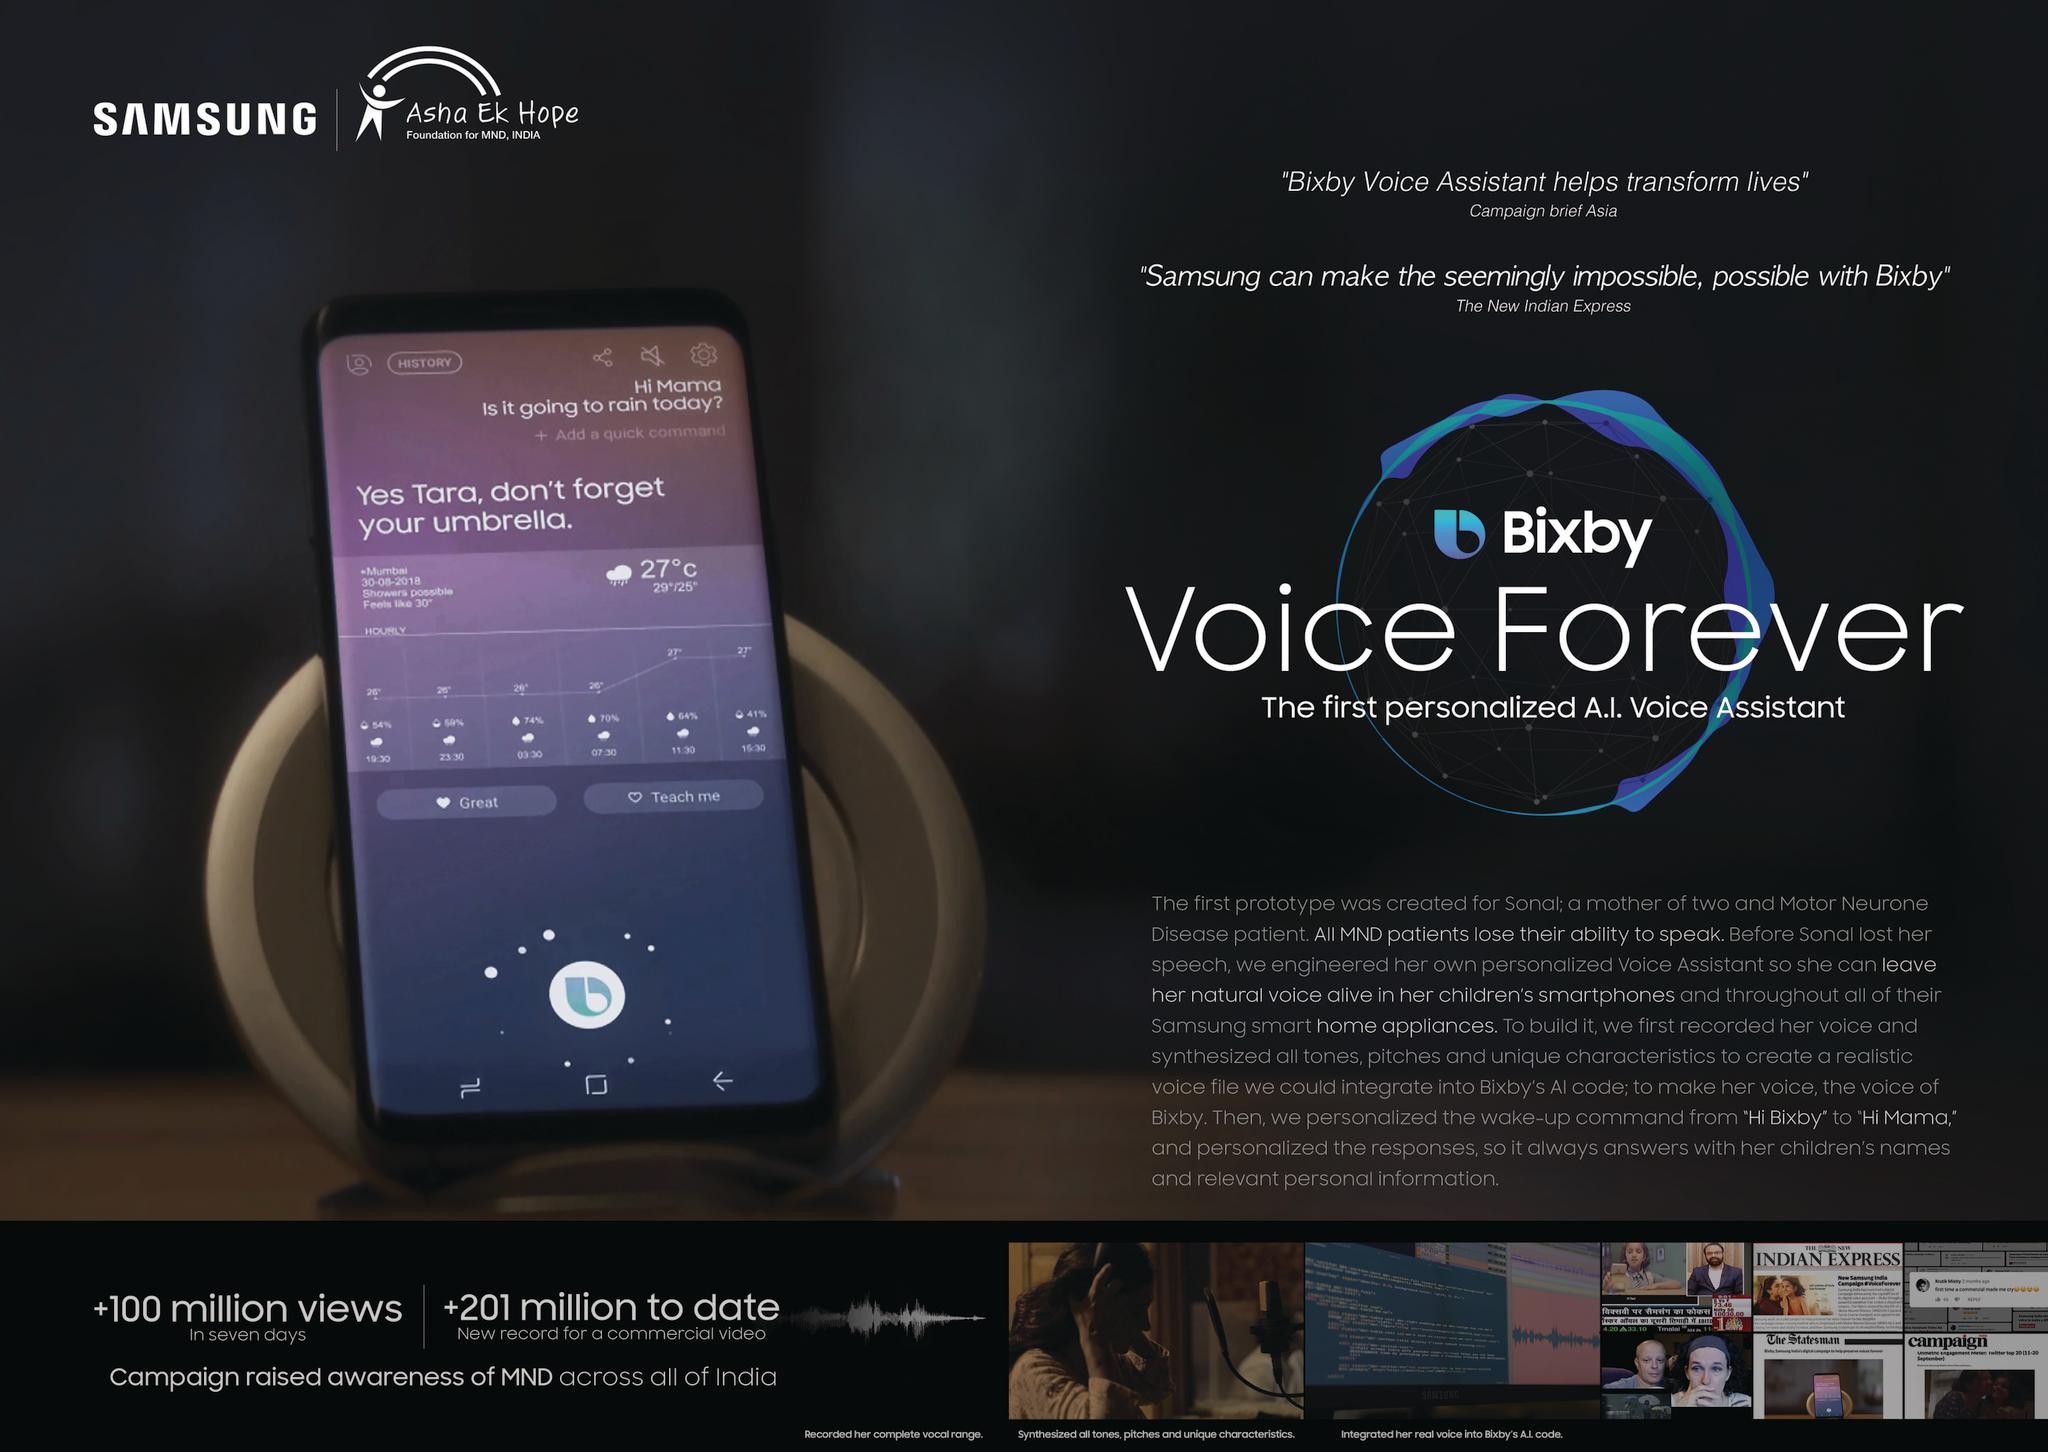 Bixby Voice Forever